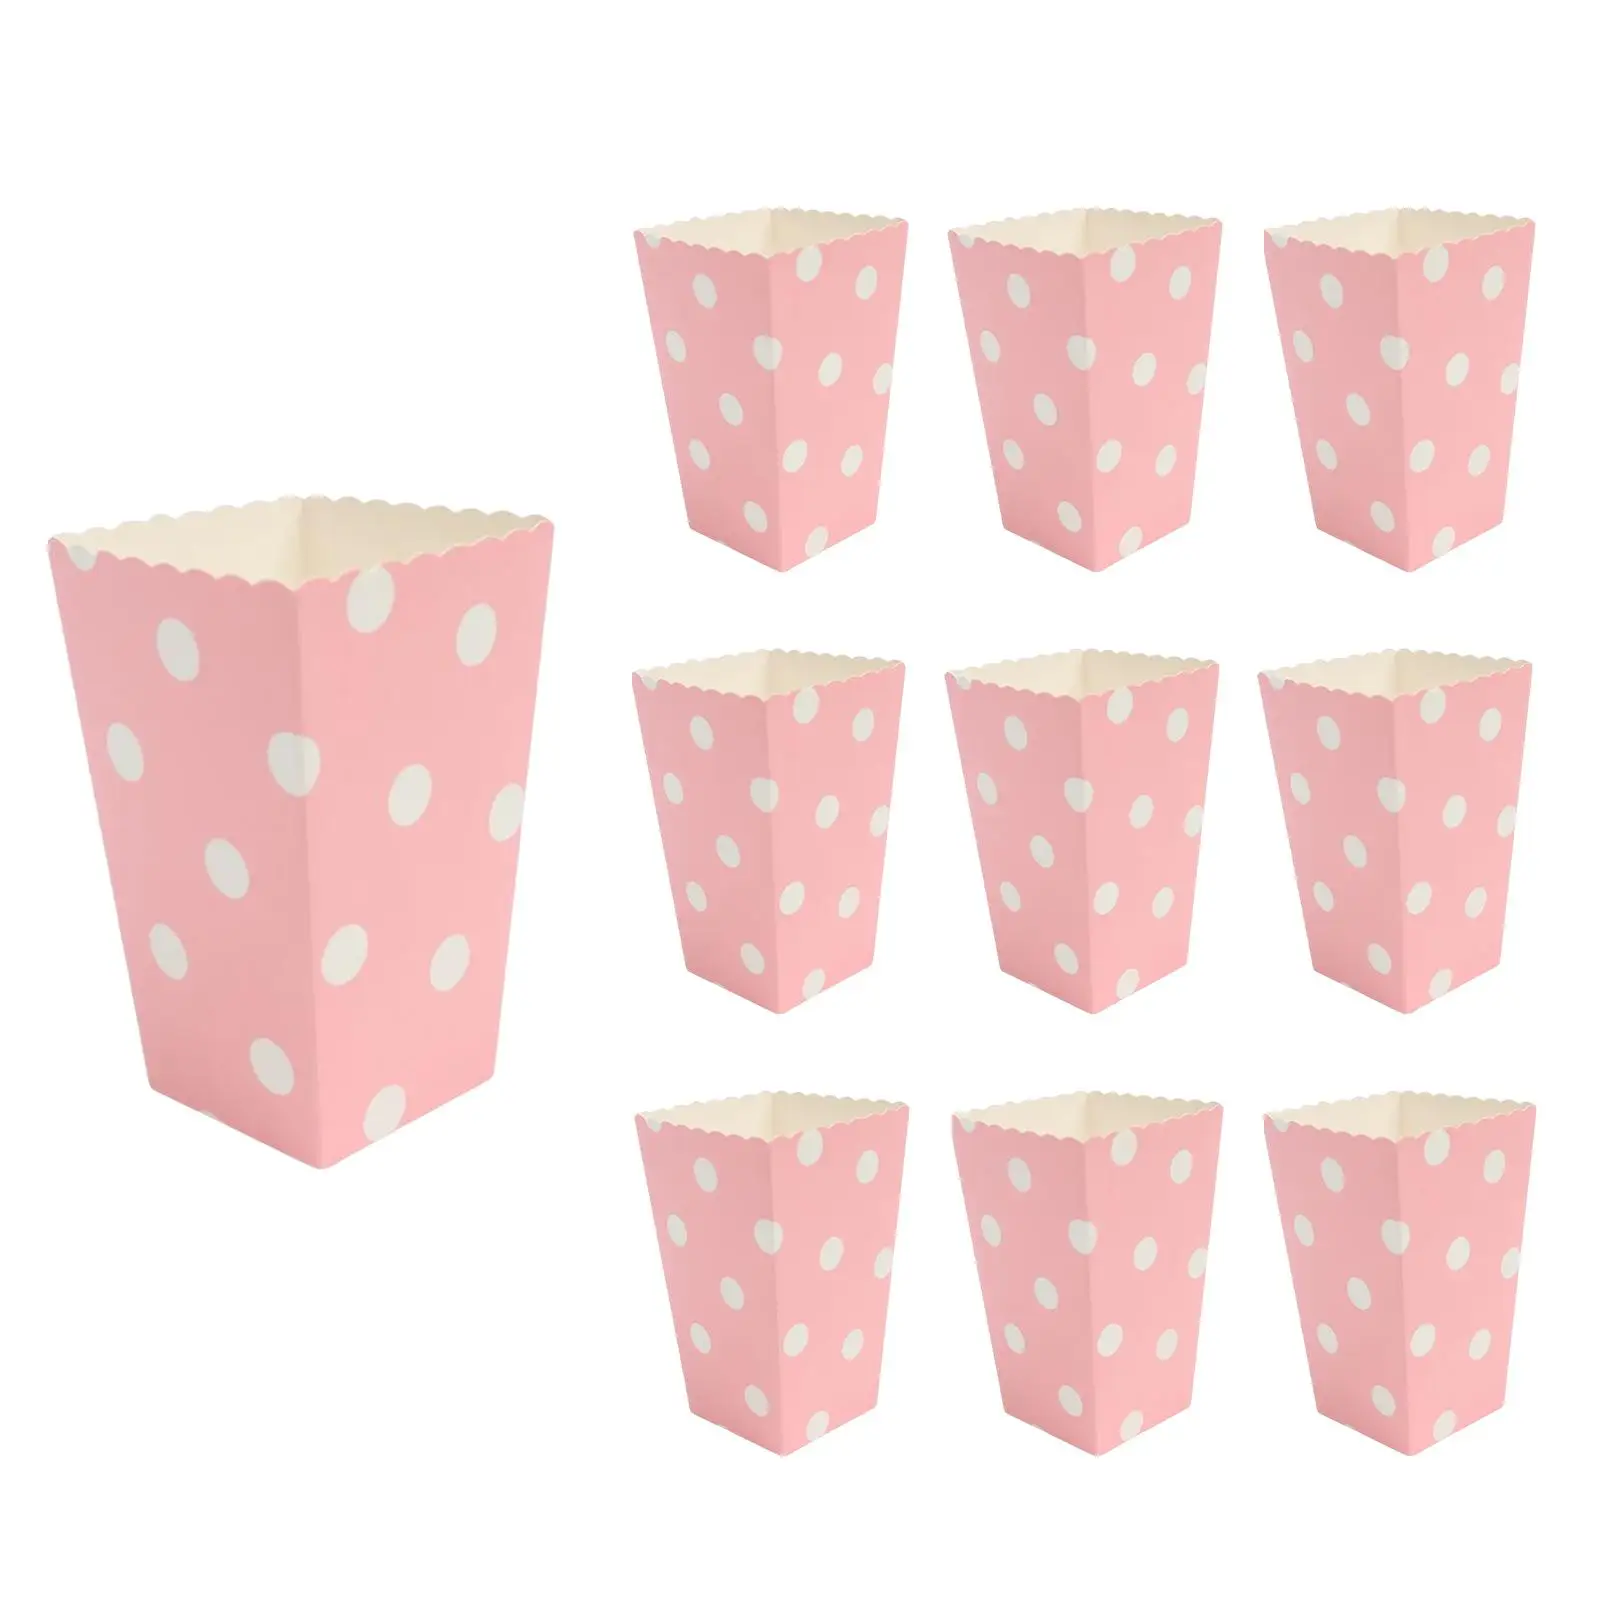 12pcs Popcorn Boxes Paper Gift Candy Bags Containers for Family Movie Night Theaters Festivals Party Wedding Supplies